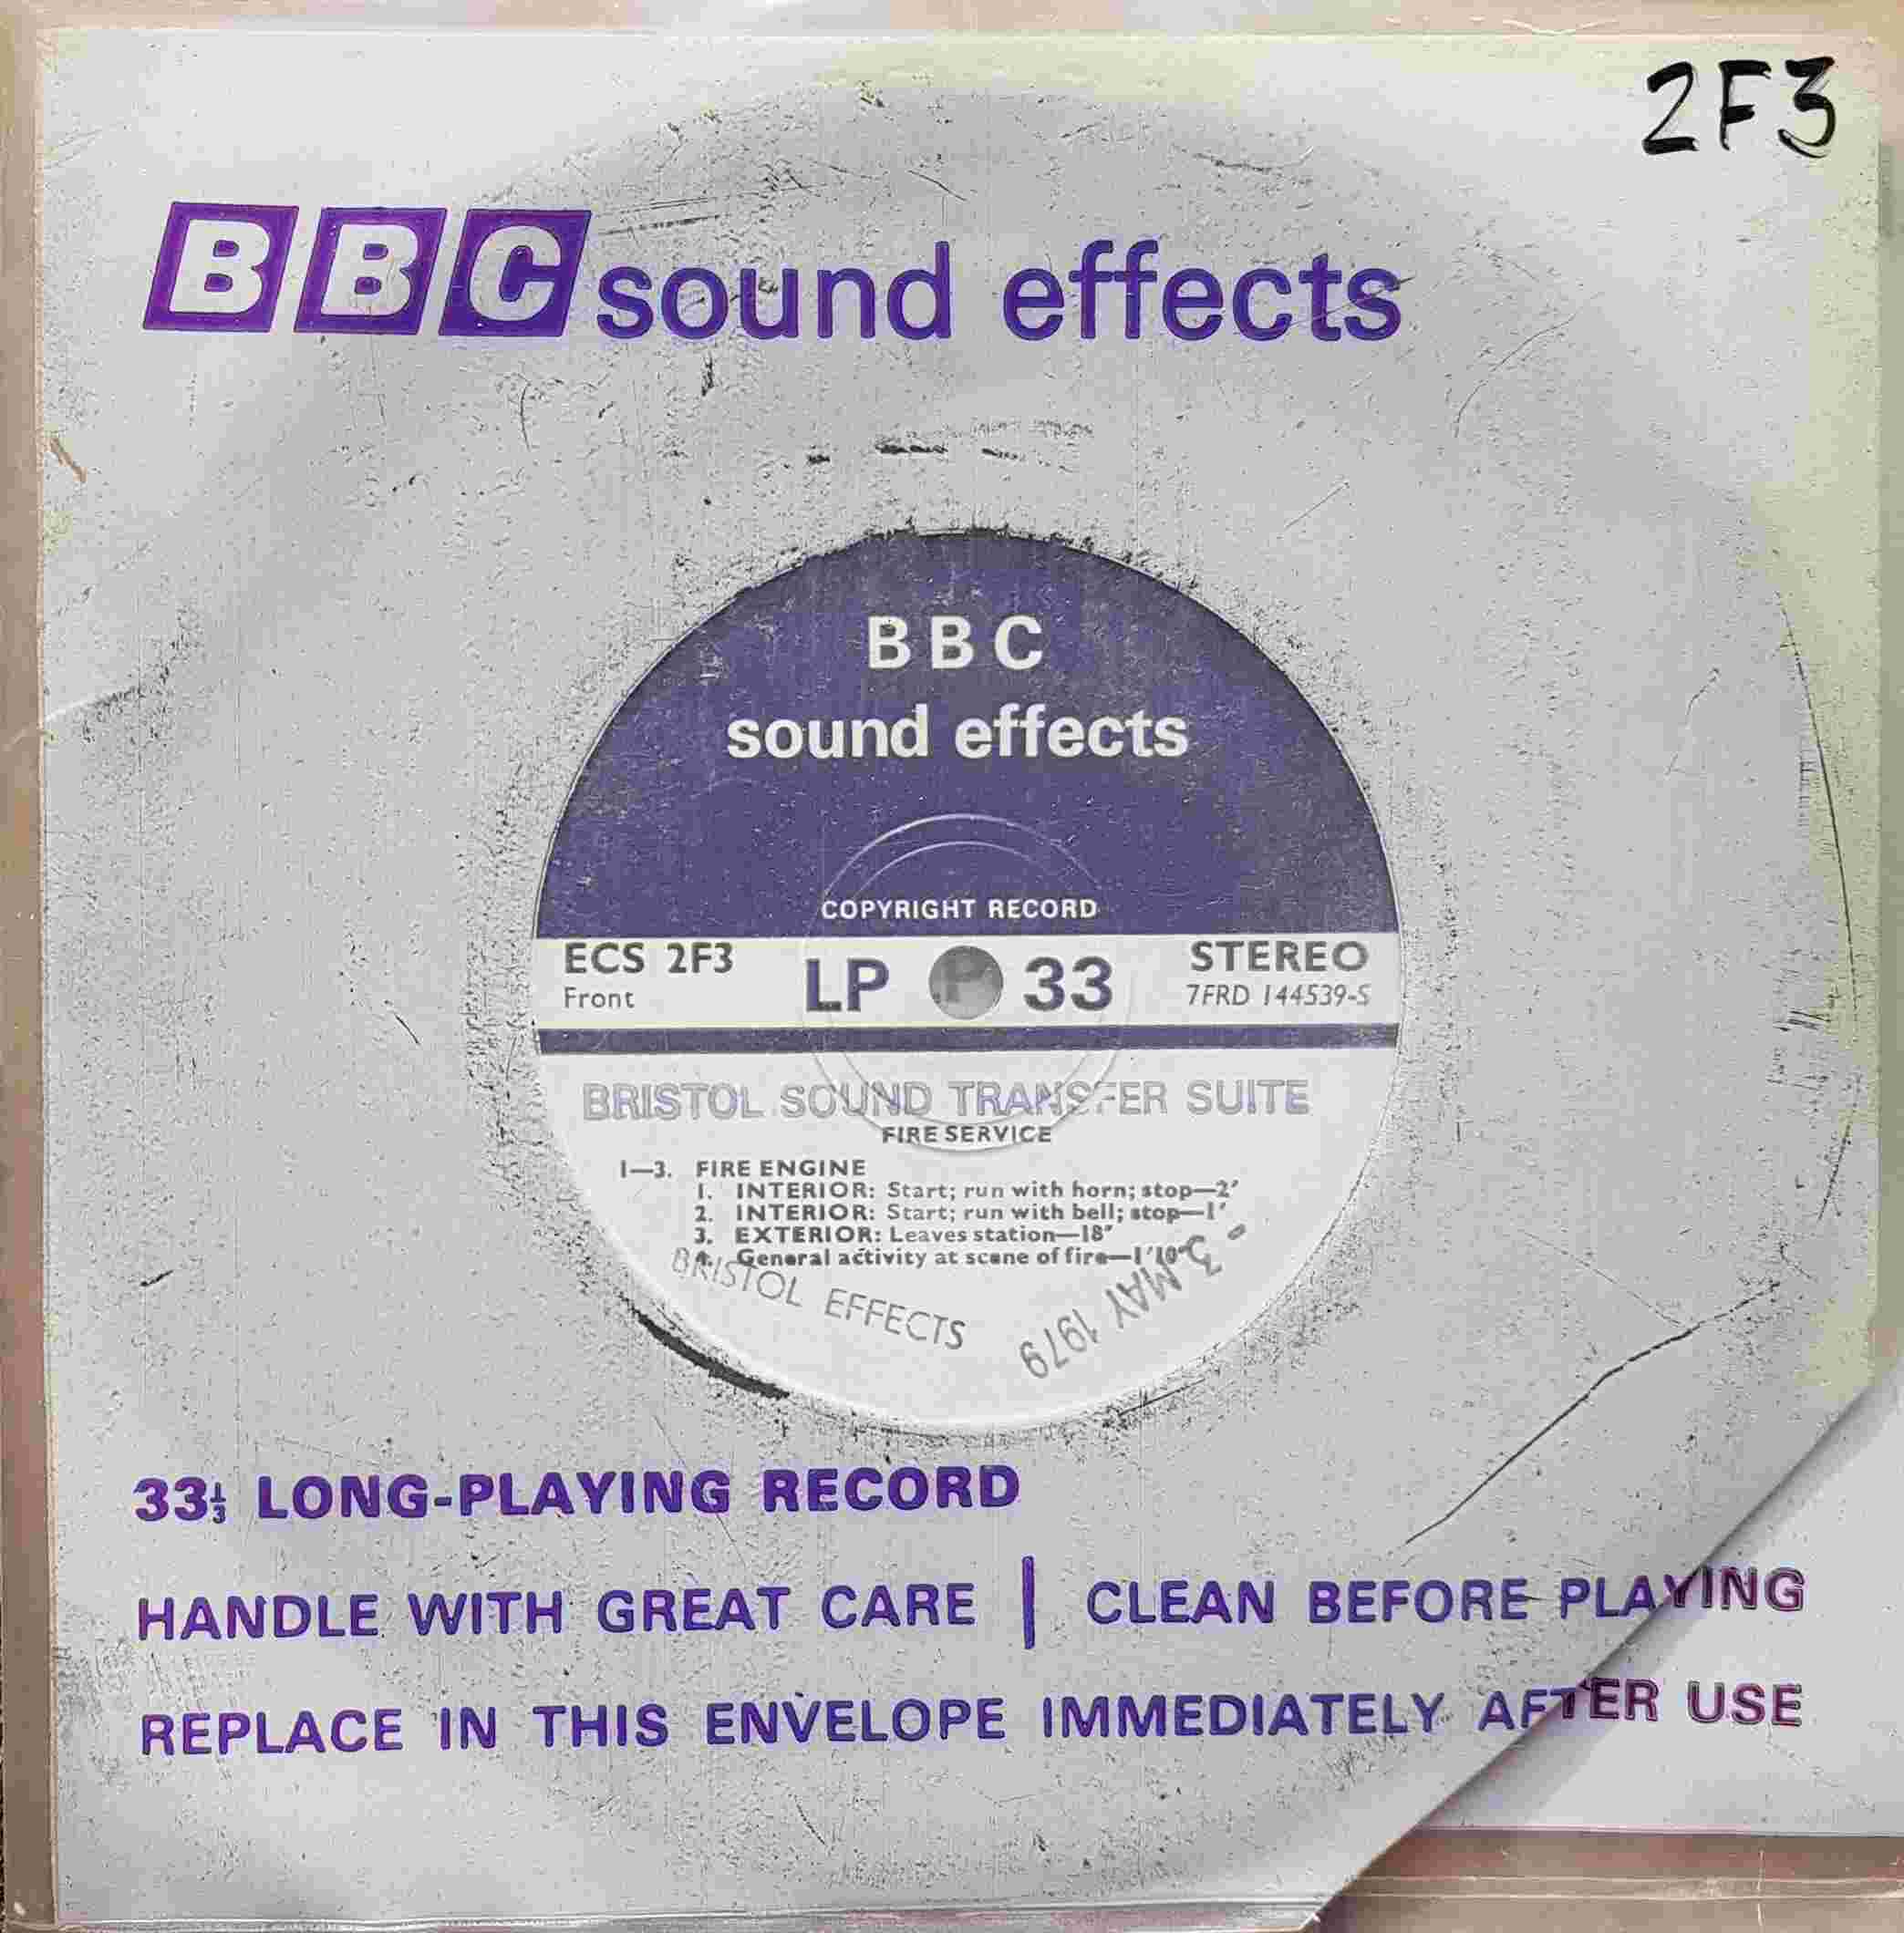 Picture of ECS 2F3 Fire service by artist Not registered from the BBC singles - Records and Tapes library